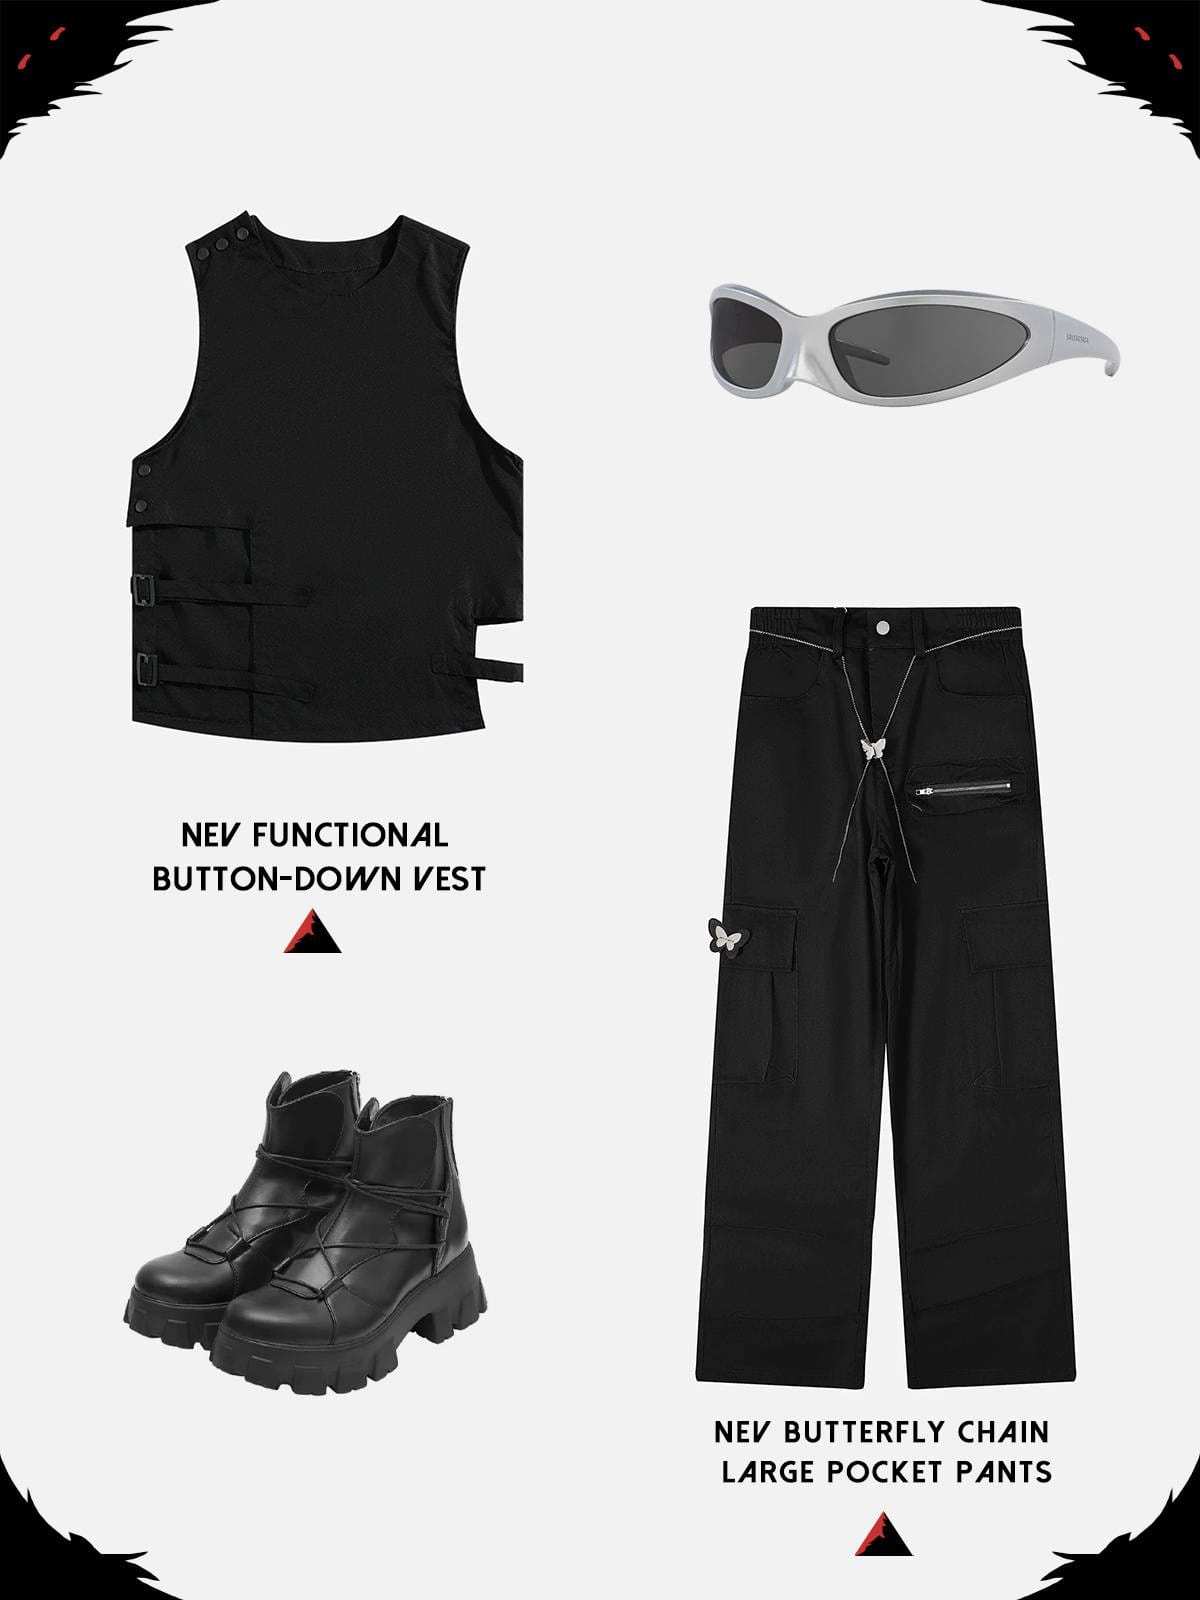 NEV Functional Button-Down Vest